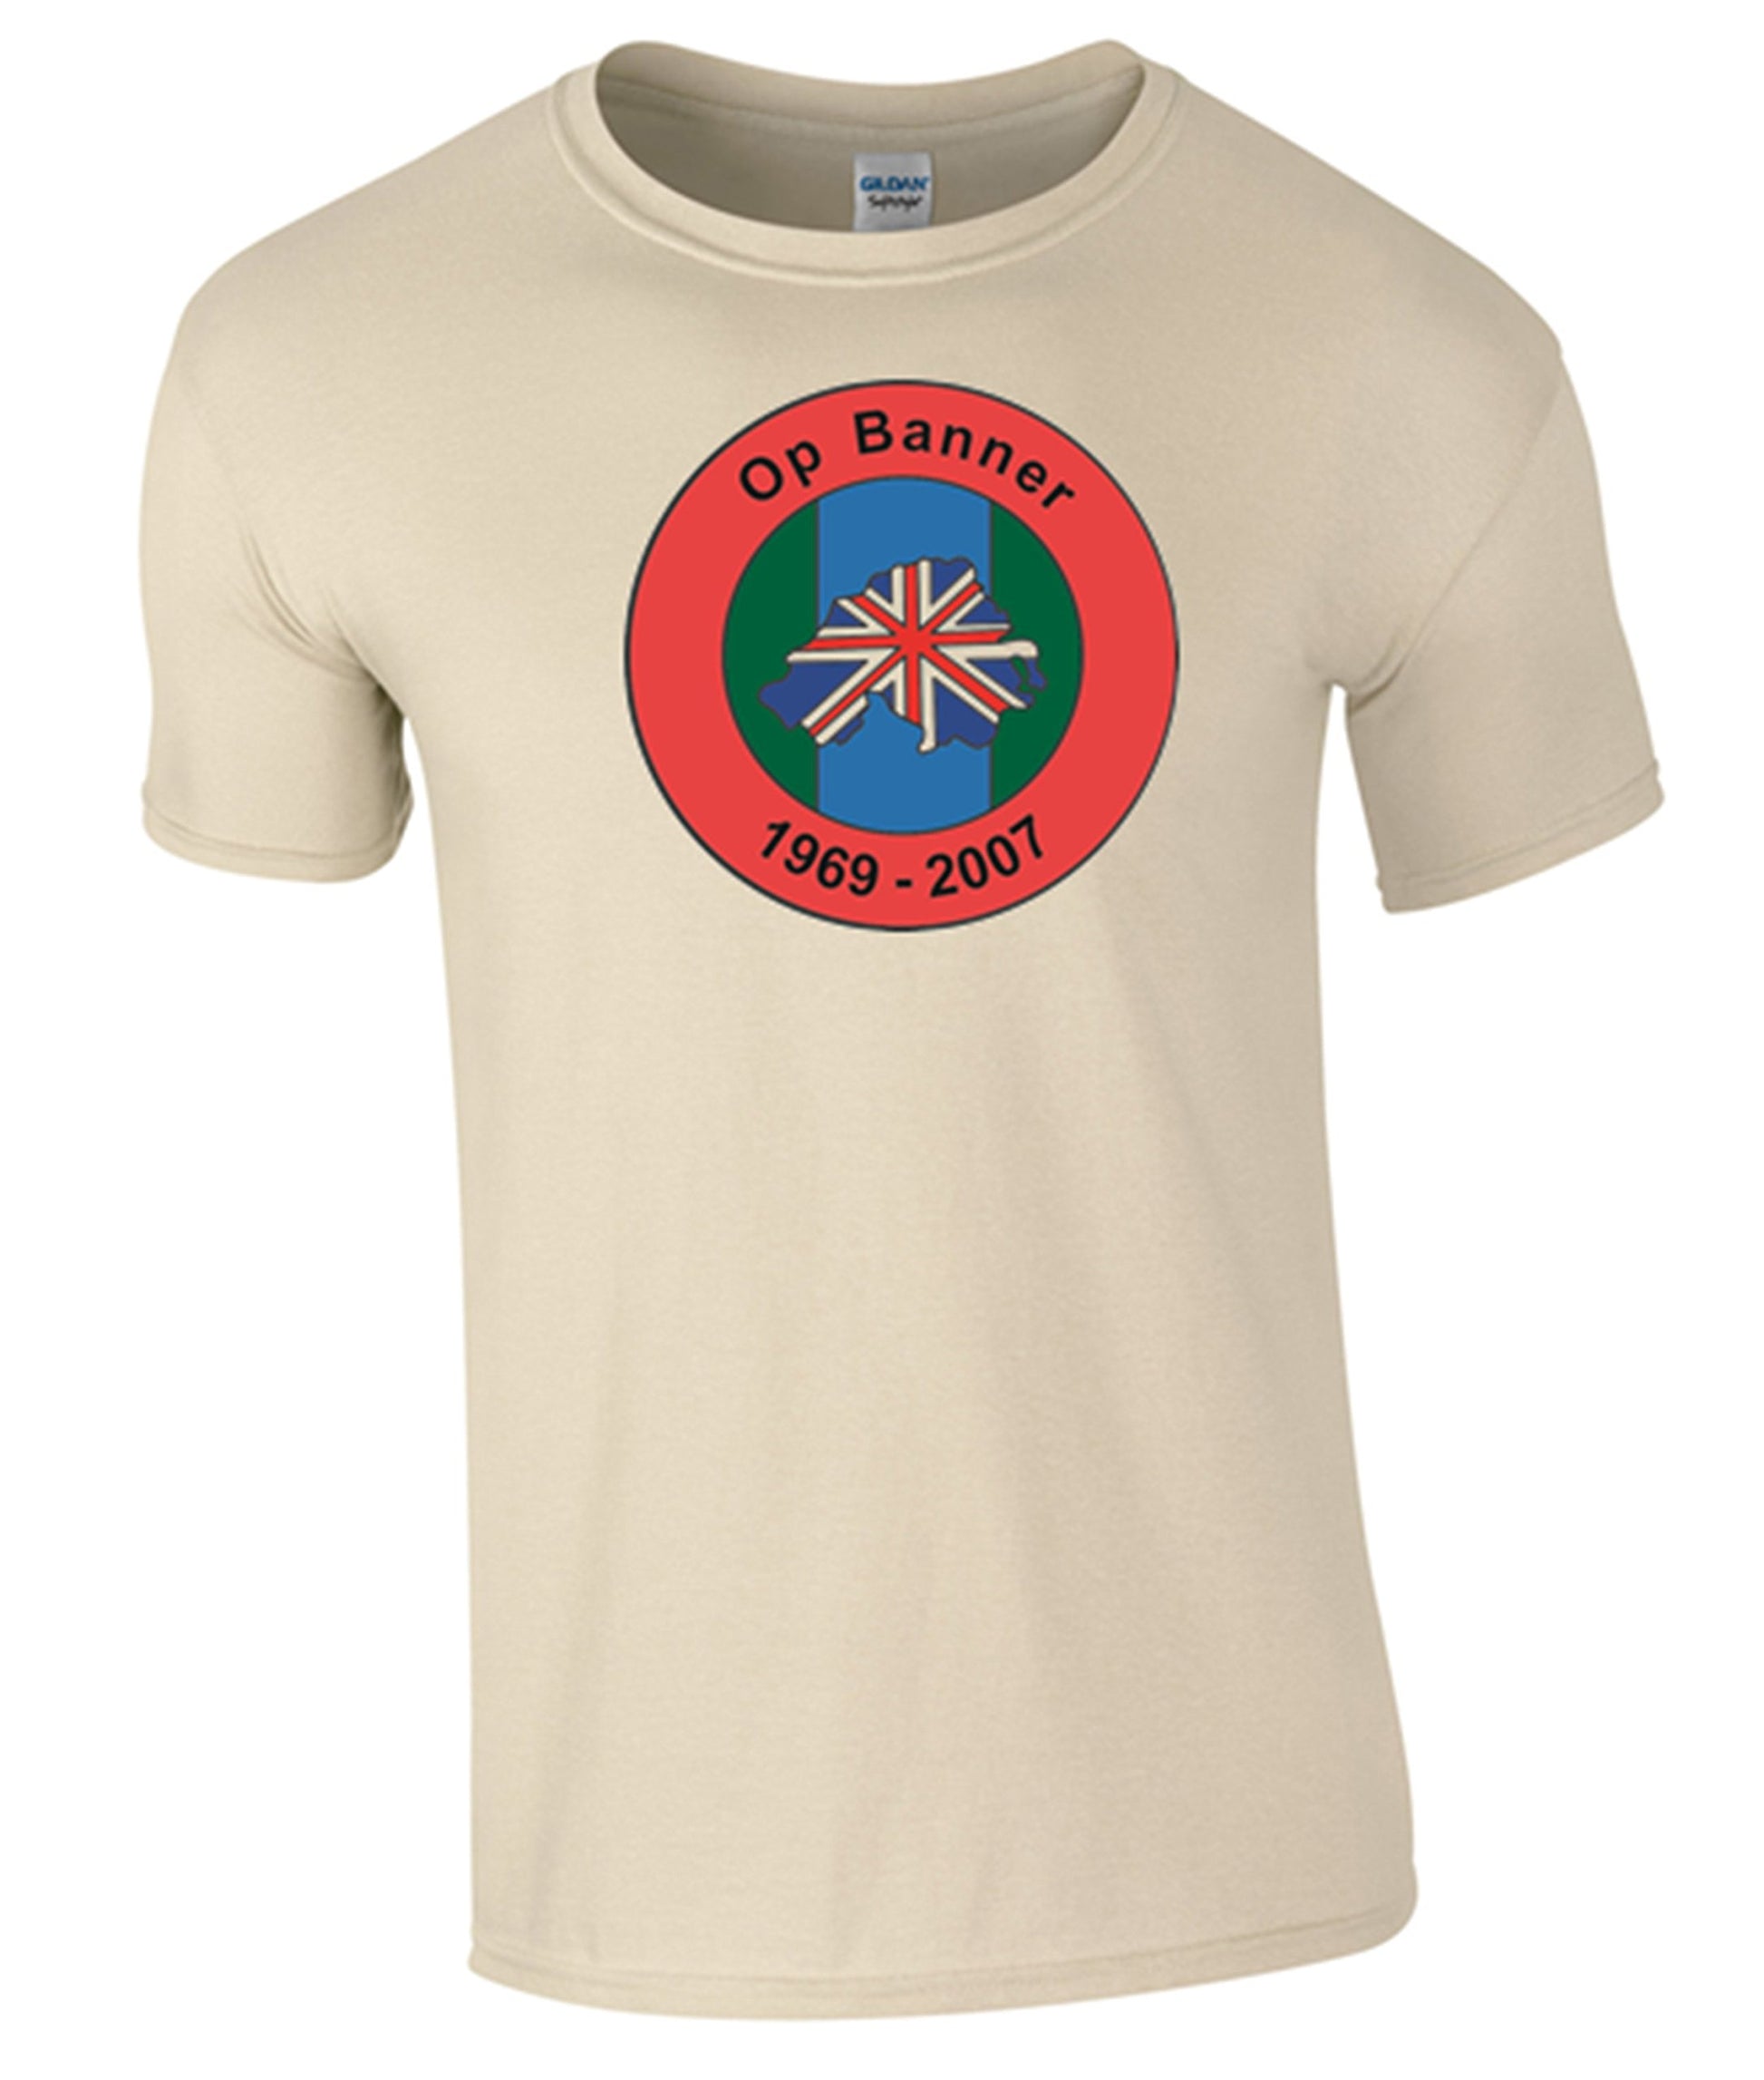 Northern Ireland Ops Banner T-Shirt (M, Sand) - Army 1157 kit Army 1157 Kit